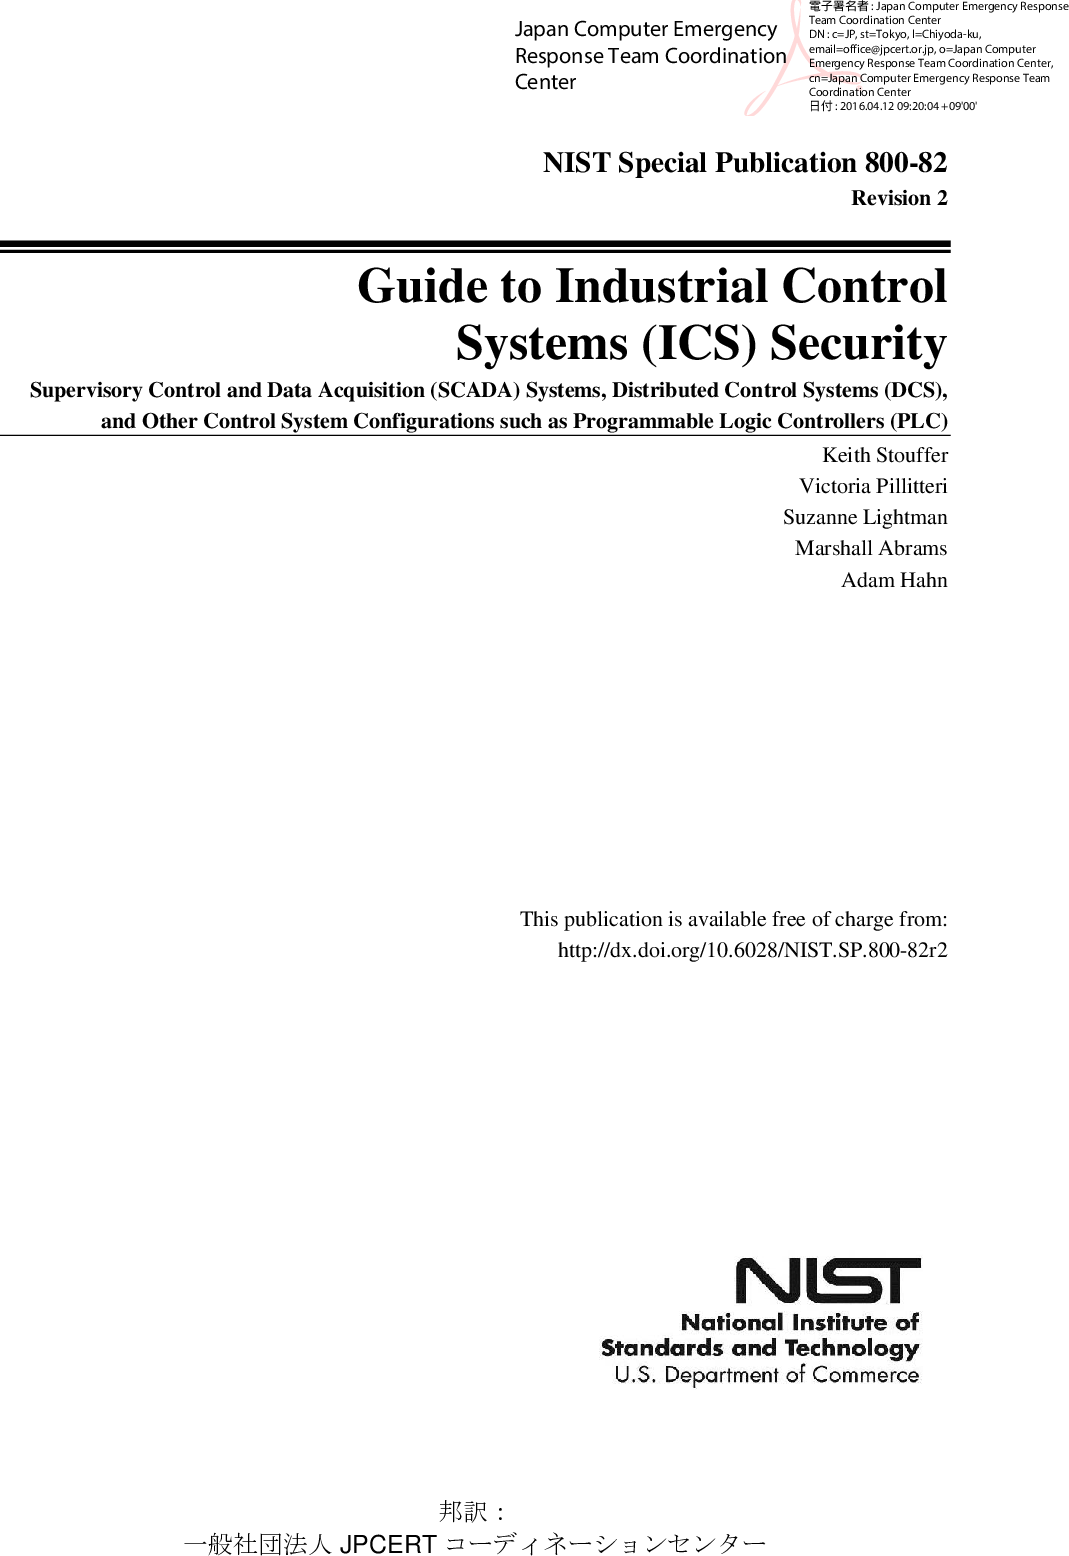 Guide To Industrial Control System Ics Security Systems Security Nist Sp 800 r2 Jpcert和